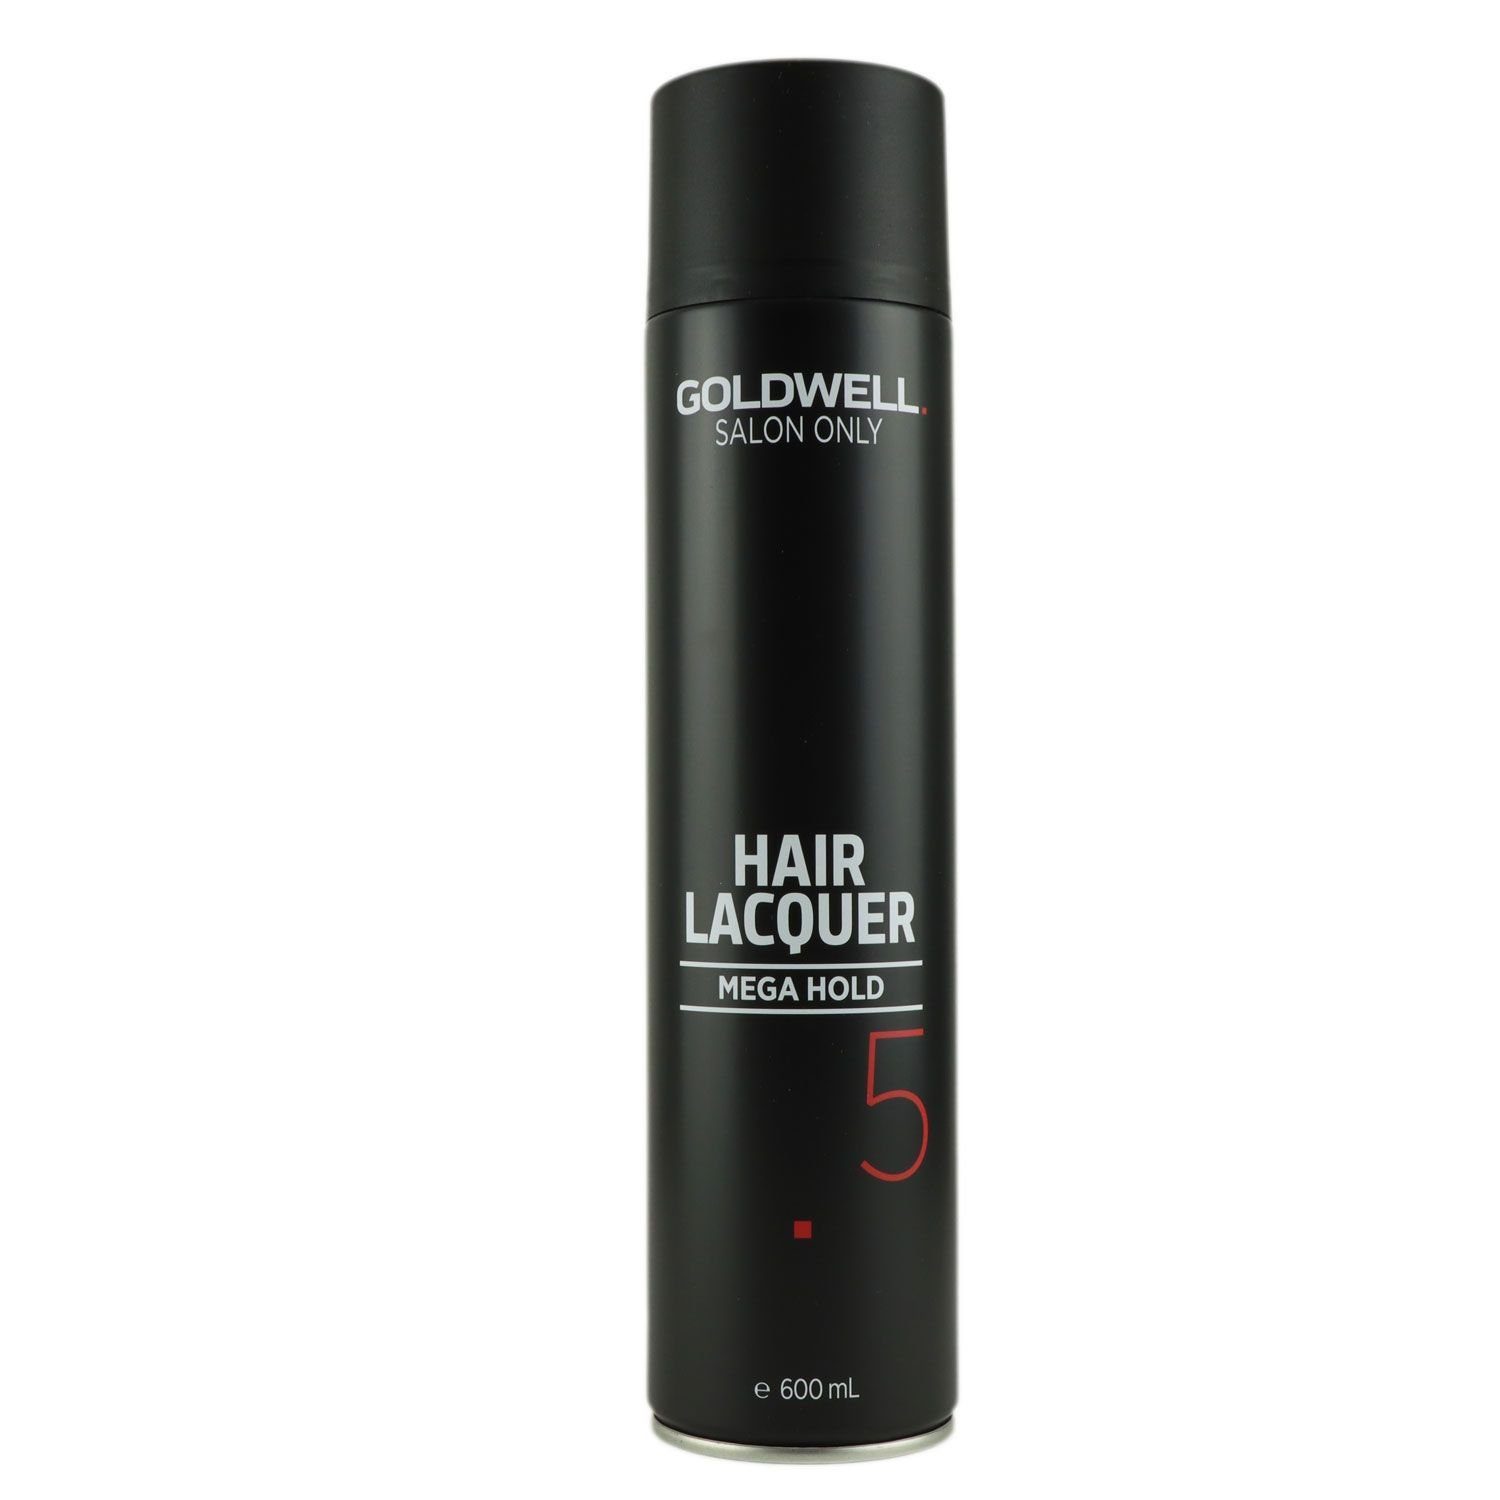 Goldwell Haarspray Salon ml hold Hair 600 mega Lacquer Only